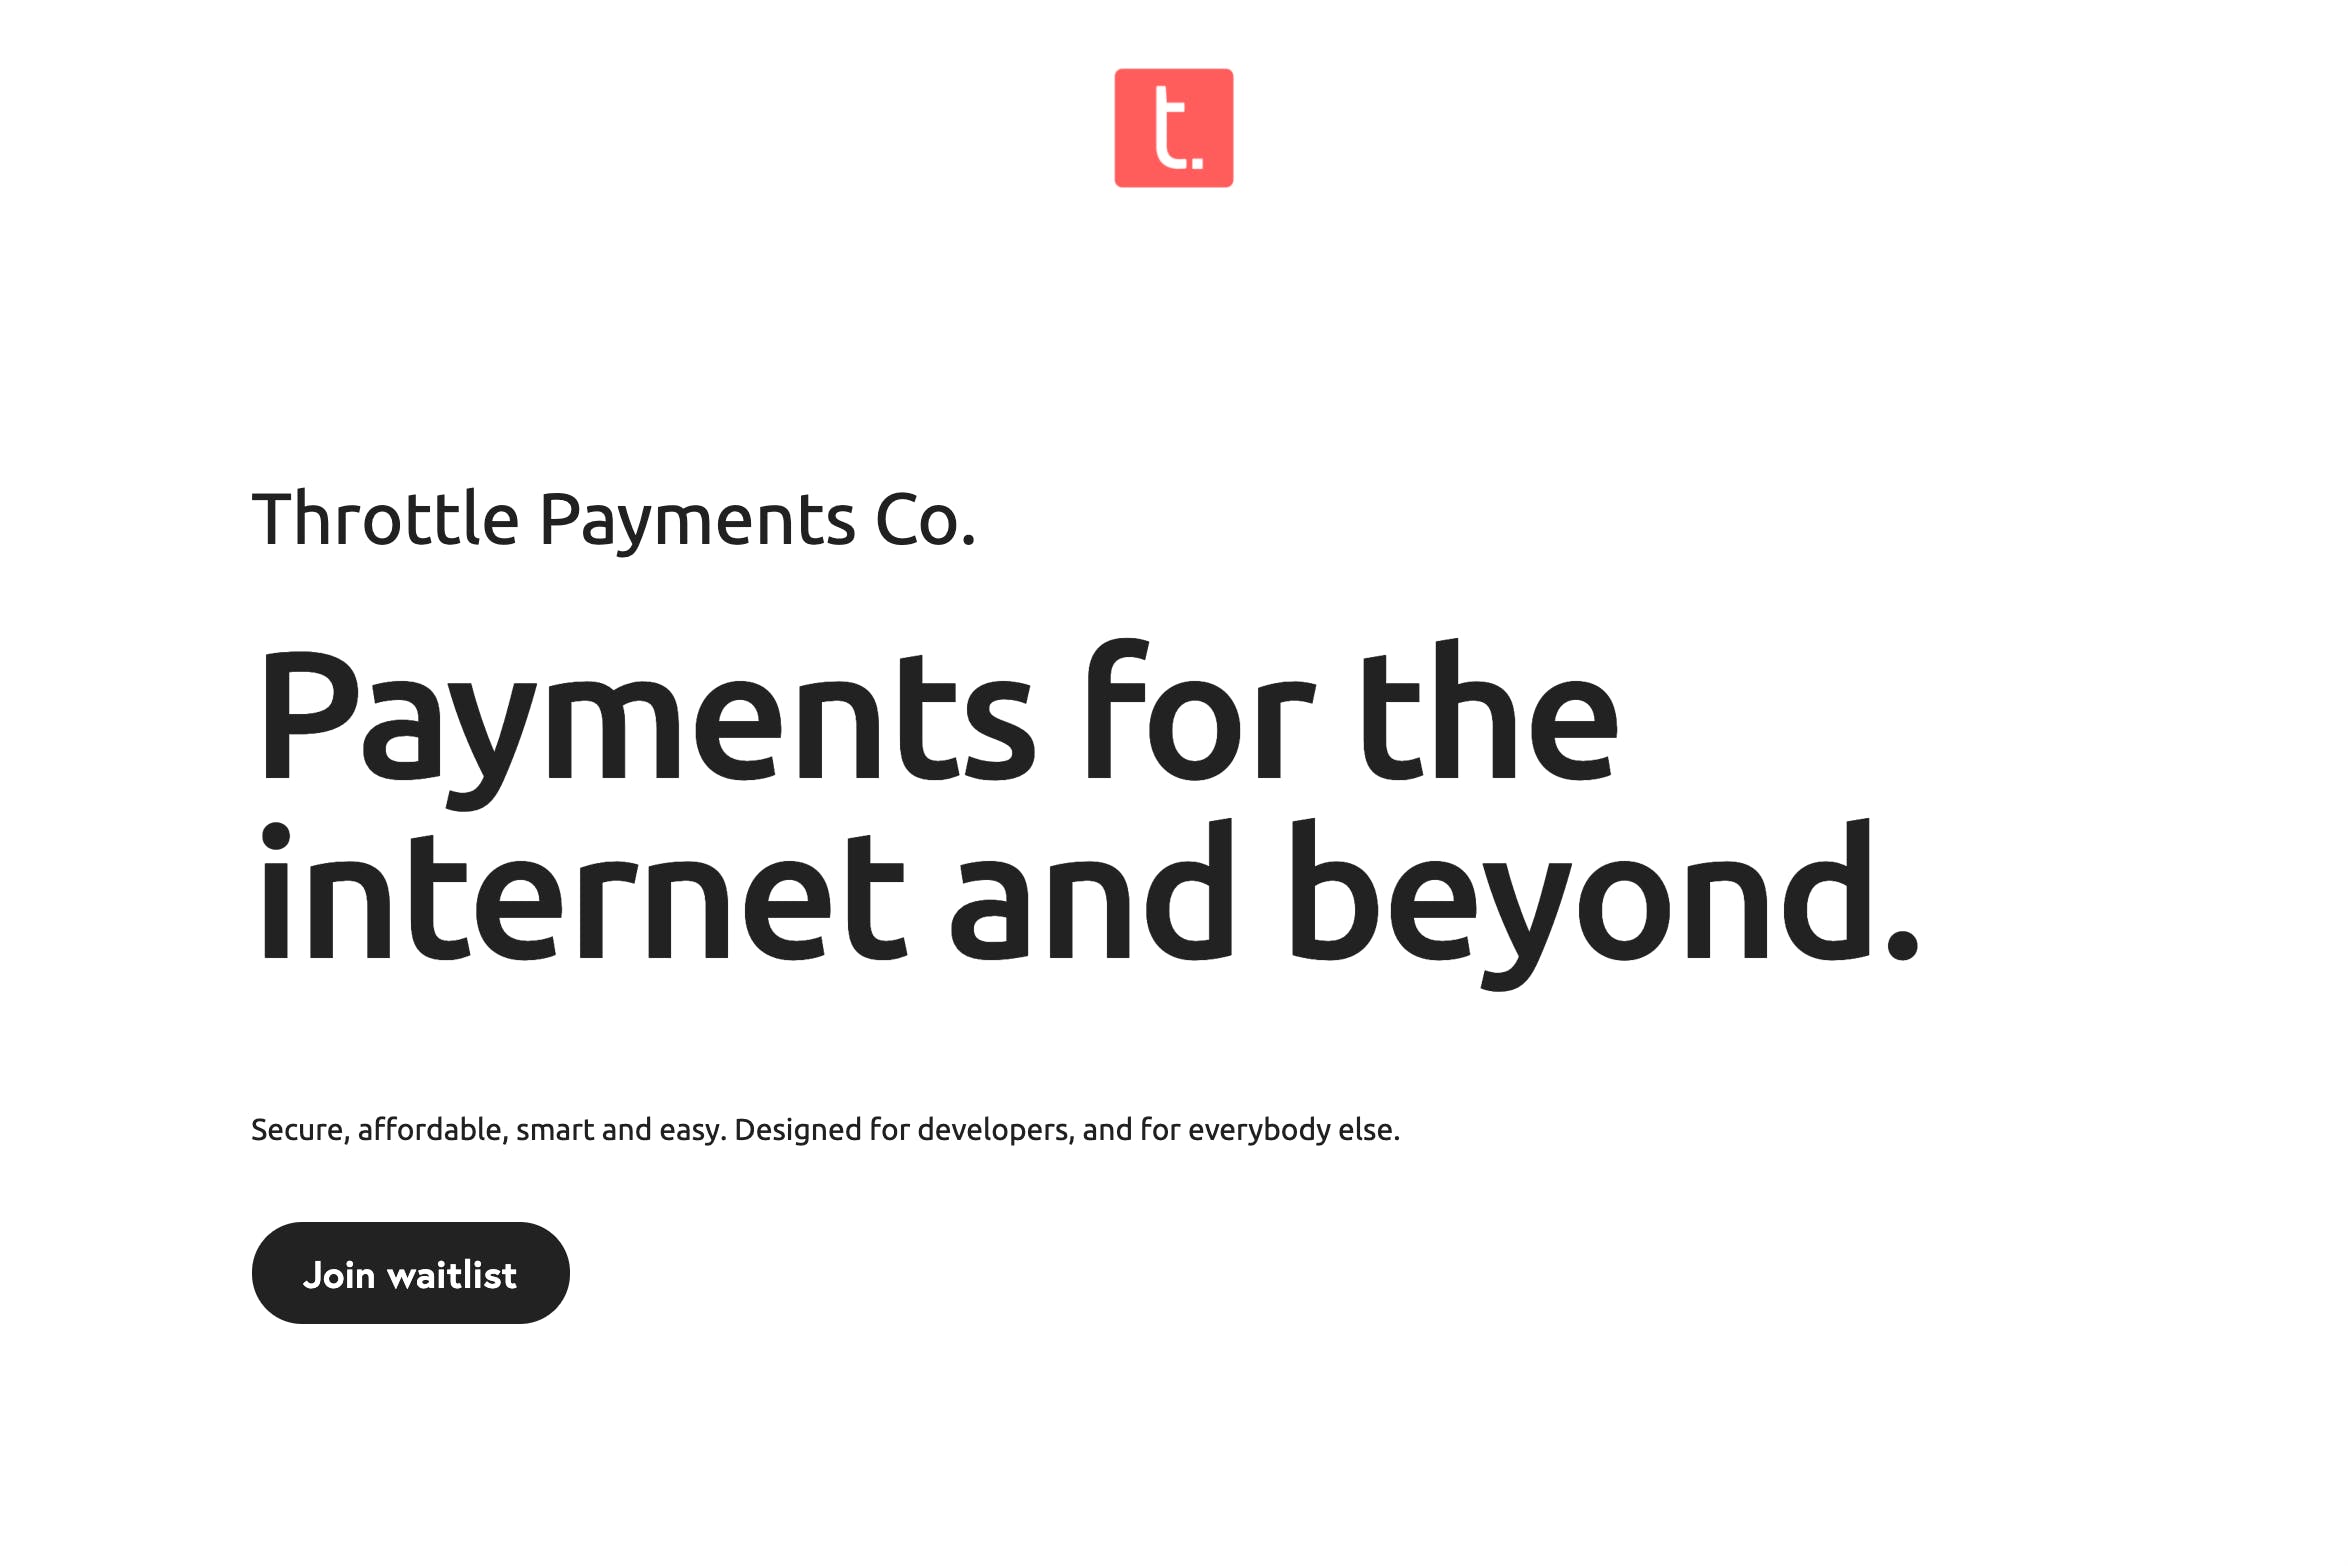 Throttle Payments Co. media 1